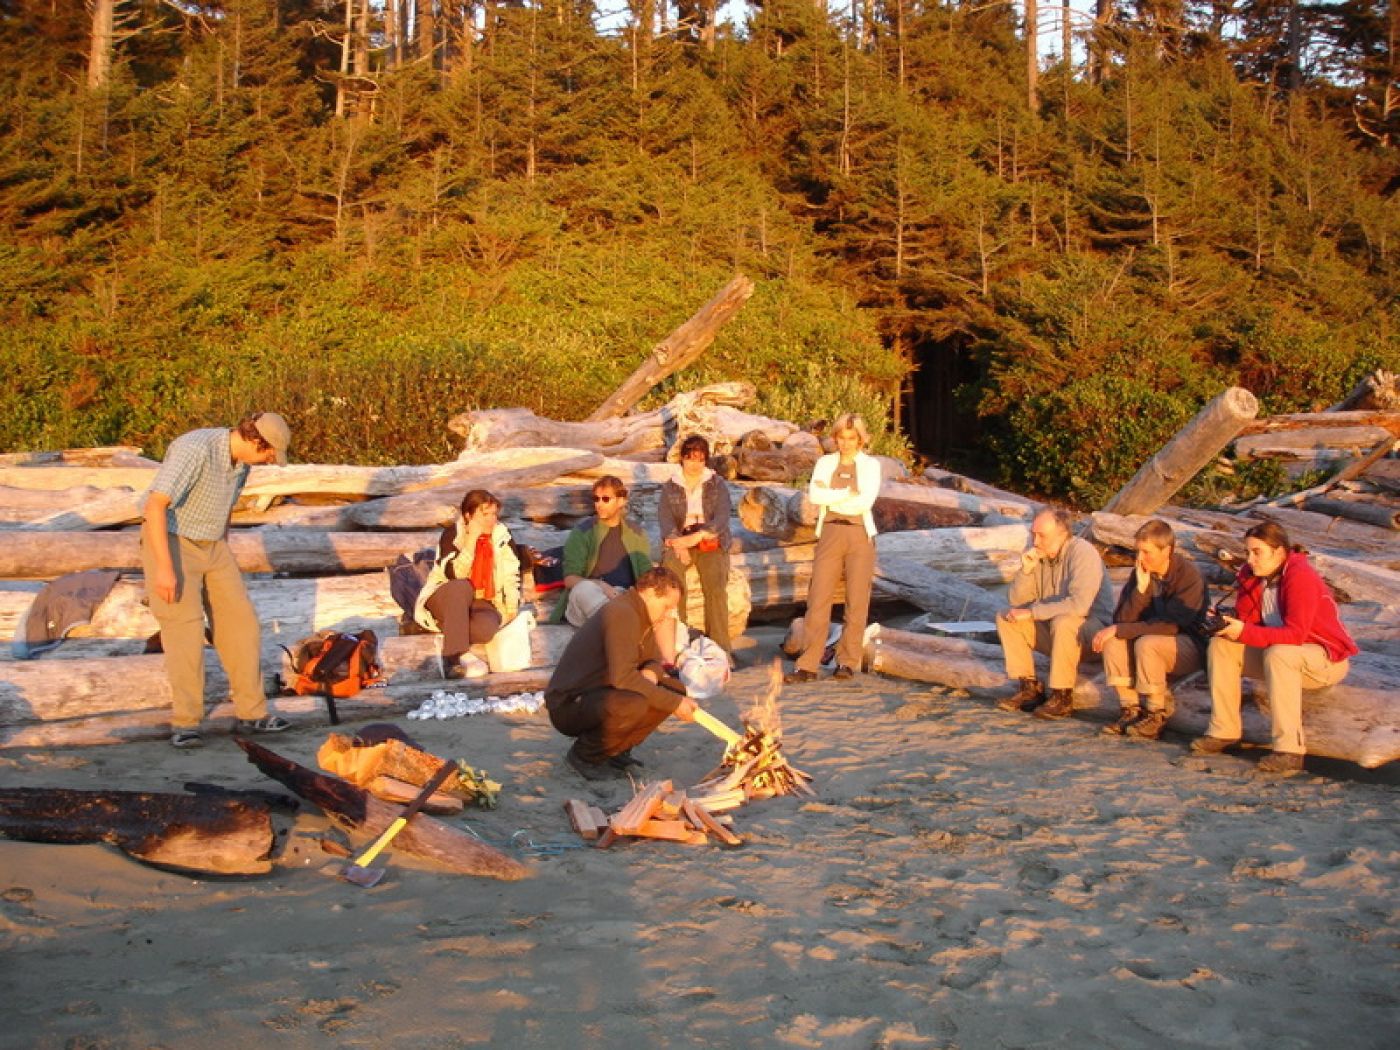 small group camping on beach of vancouver island | camping mit kleiner gruppe am strand von vancouver island